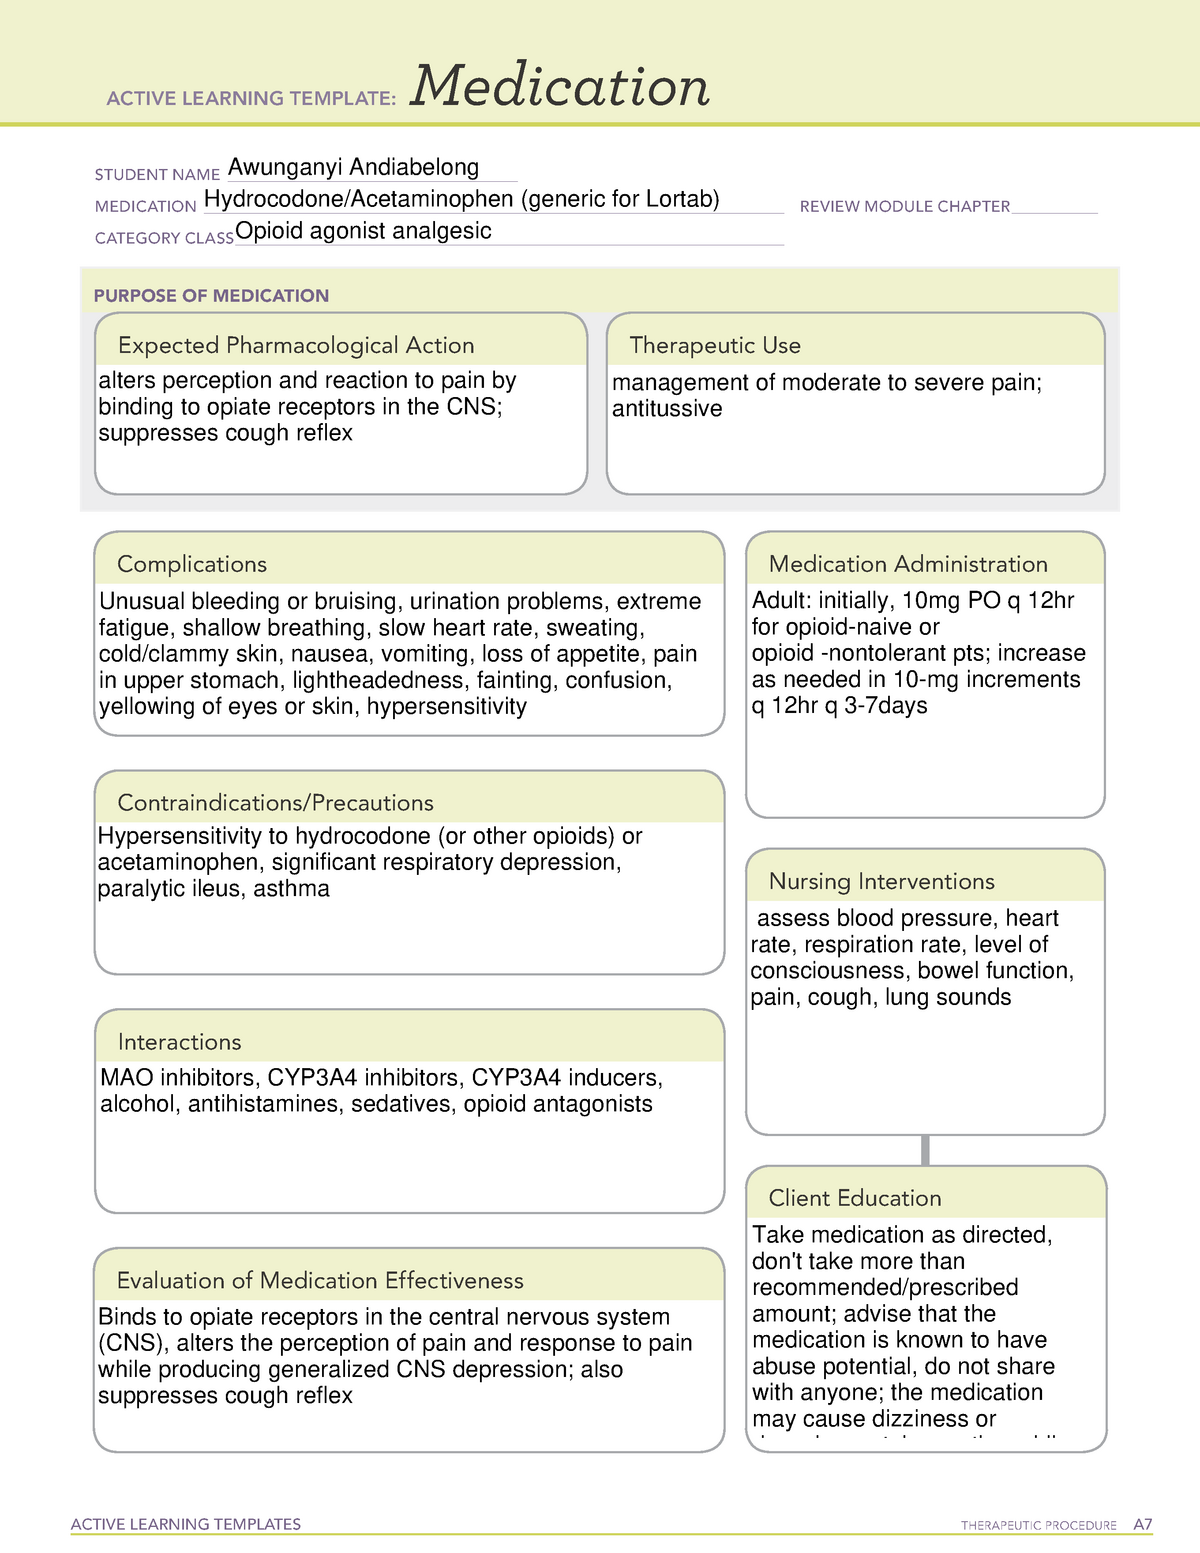 ATI Medication template Hydrocodone ACTIVE LEARNING TEMPLATES